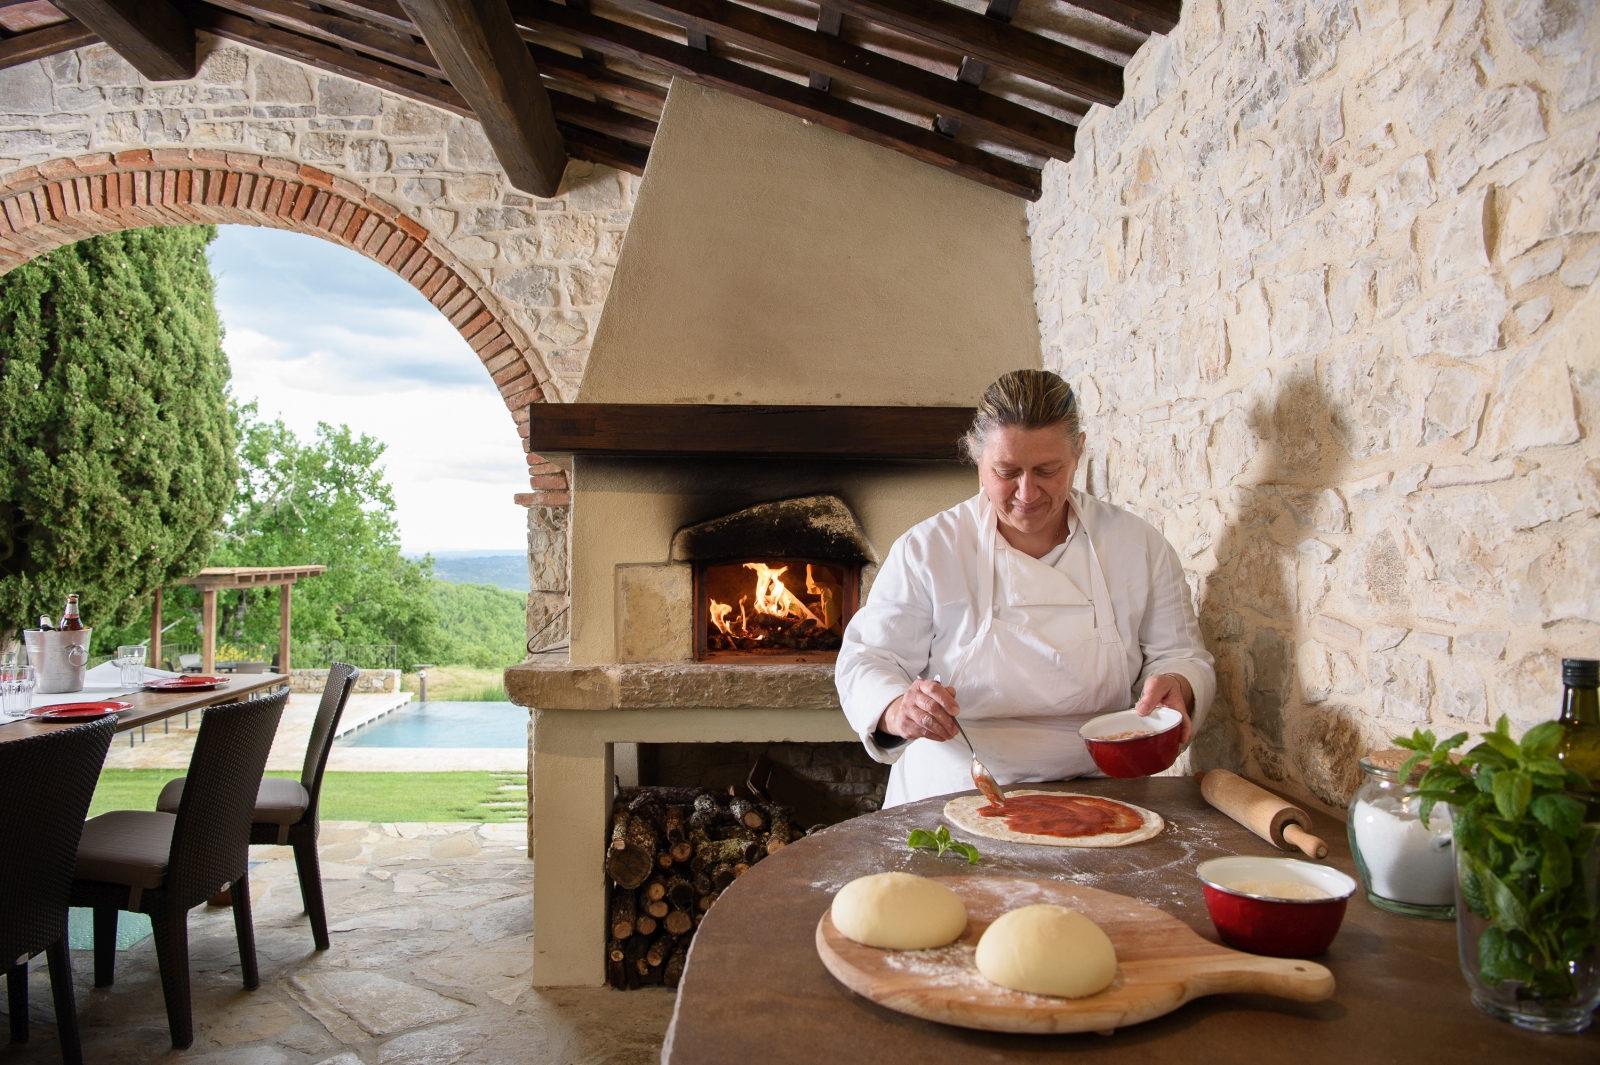 Pizza making by pool with wood fired pizza oven and chef at Tramonti in Tuscany, Italy